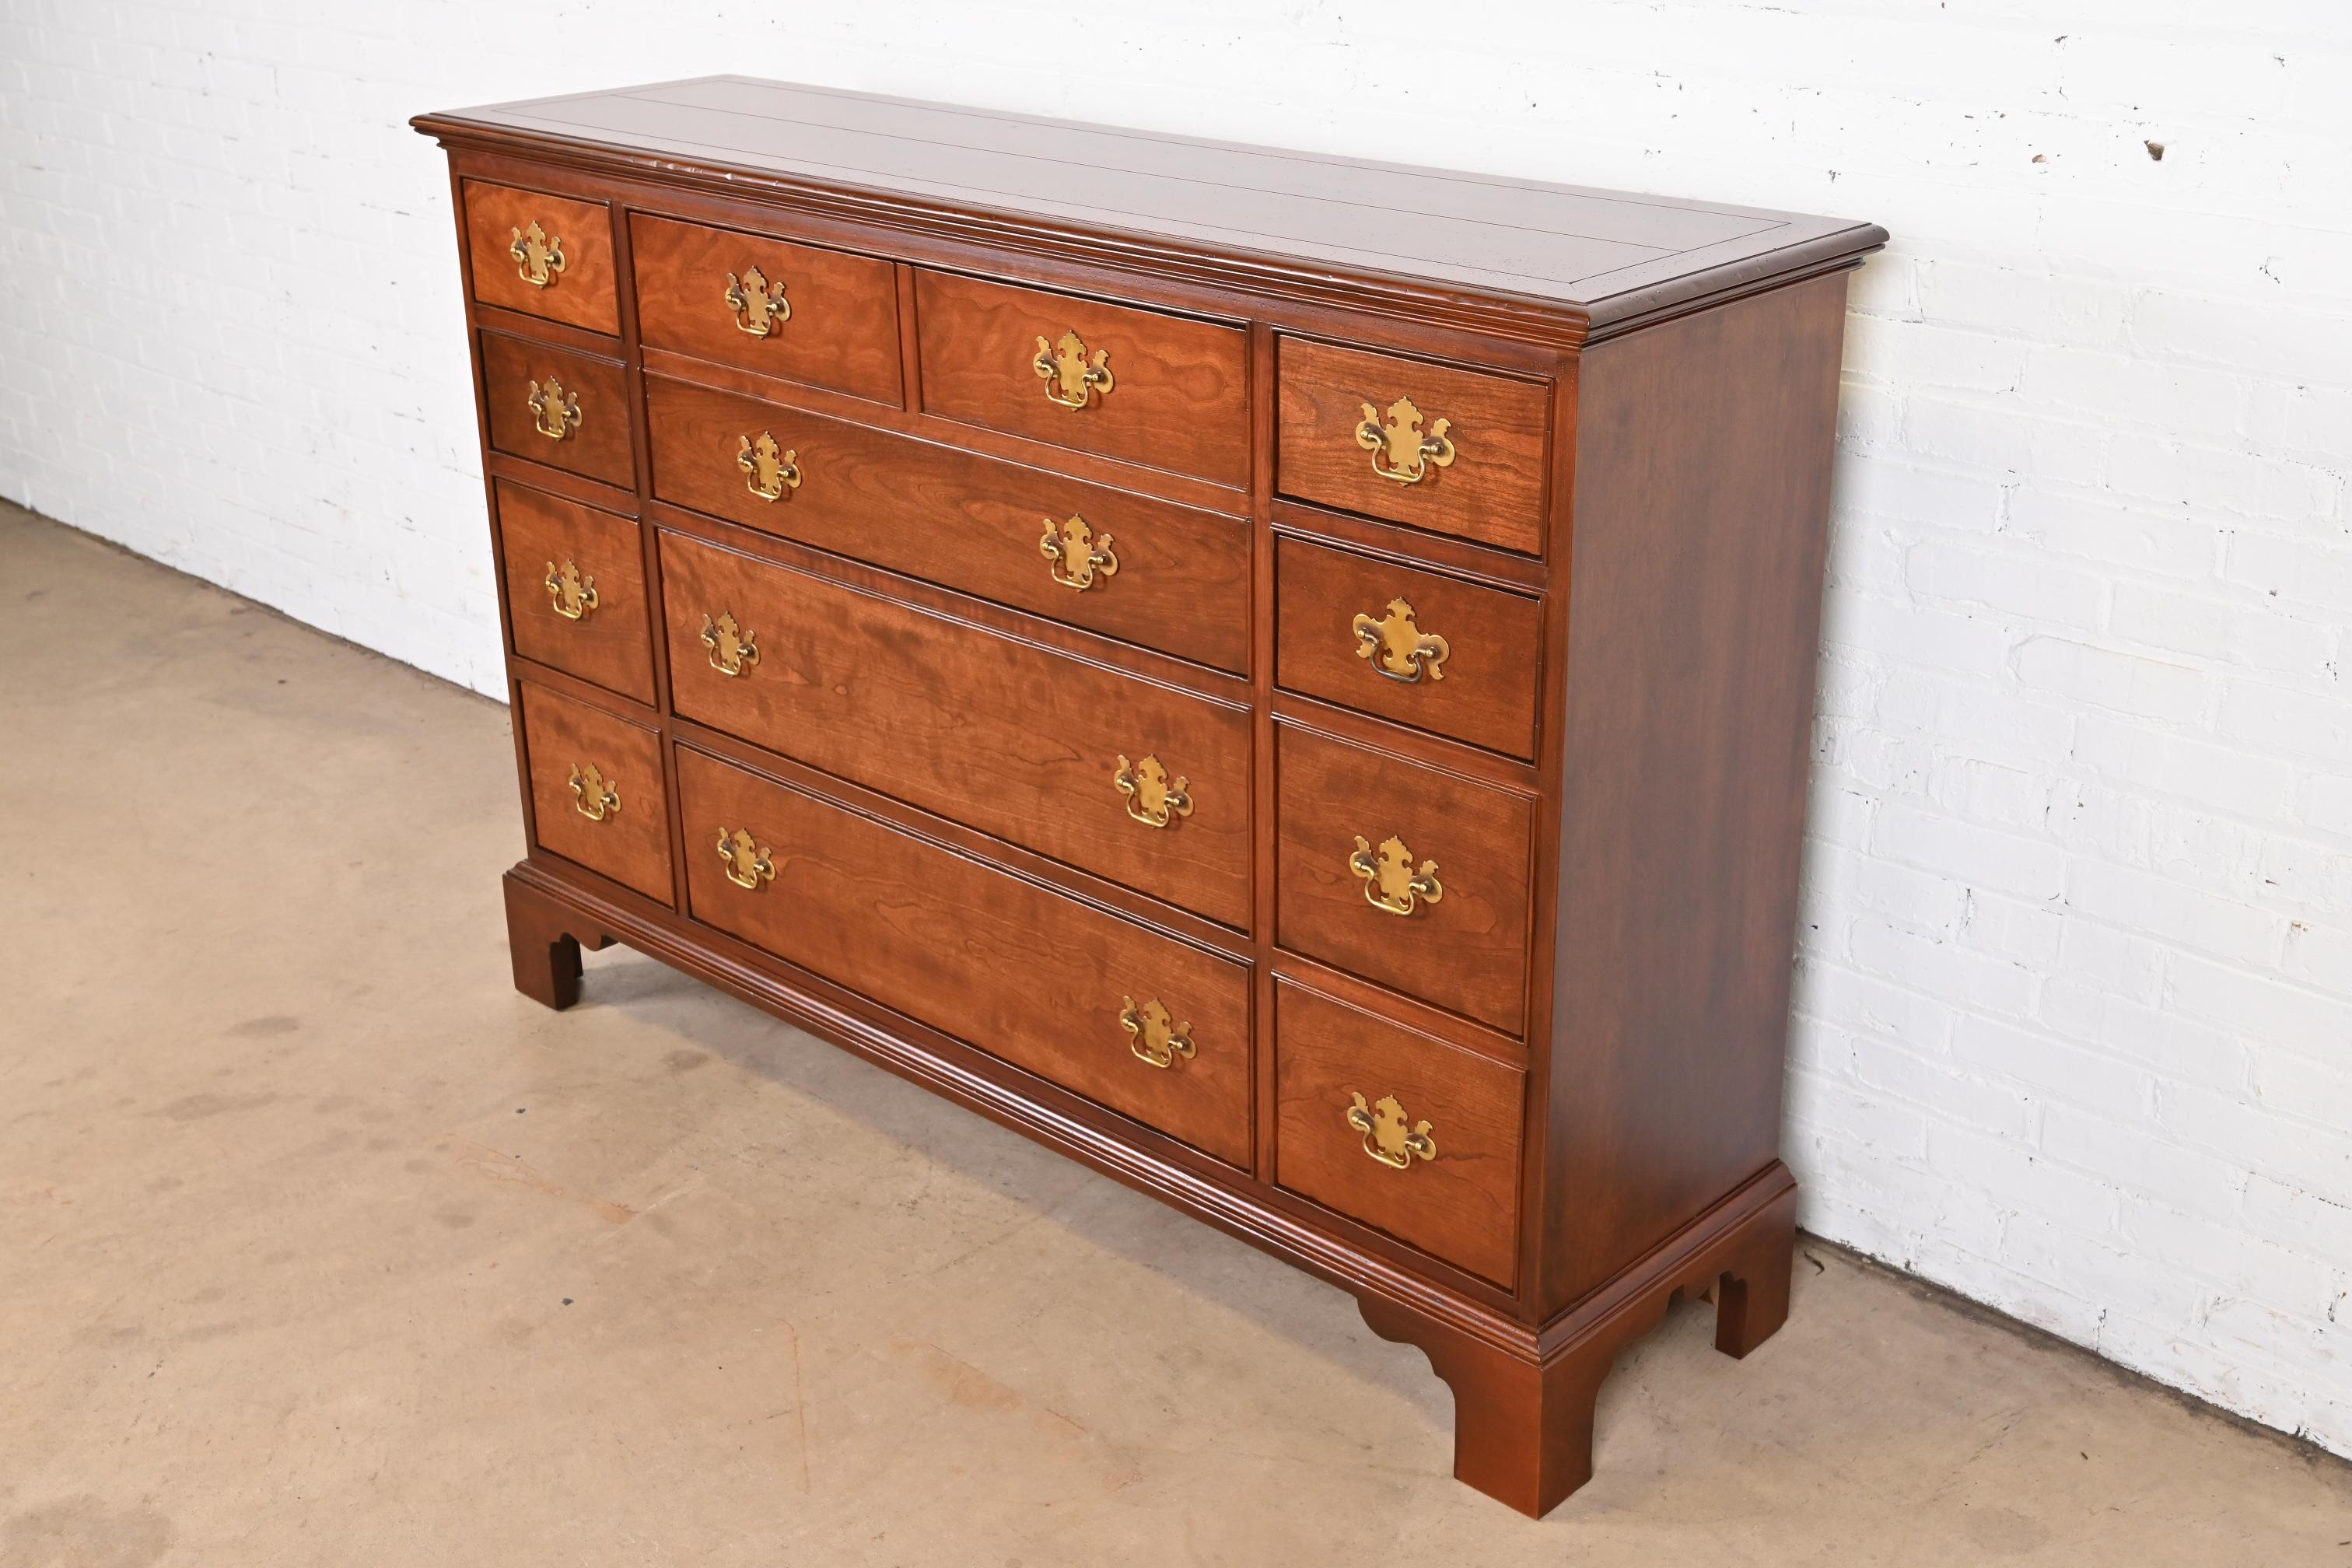 American Baker Furniture Georgian Cherry Chest of Drawers with Secretary Desk, Refinished